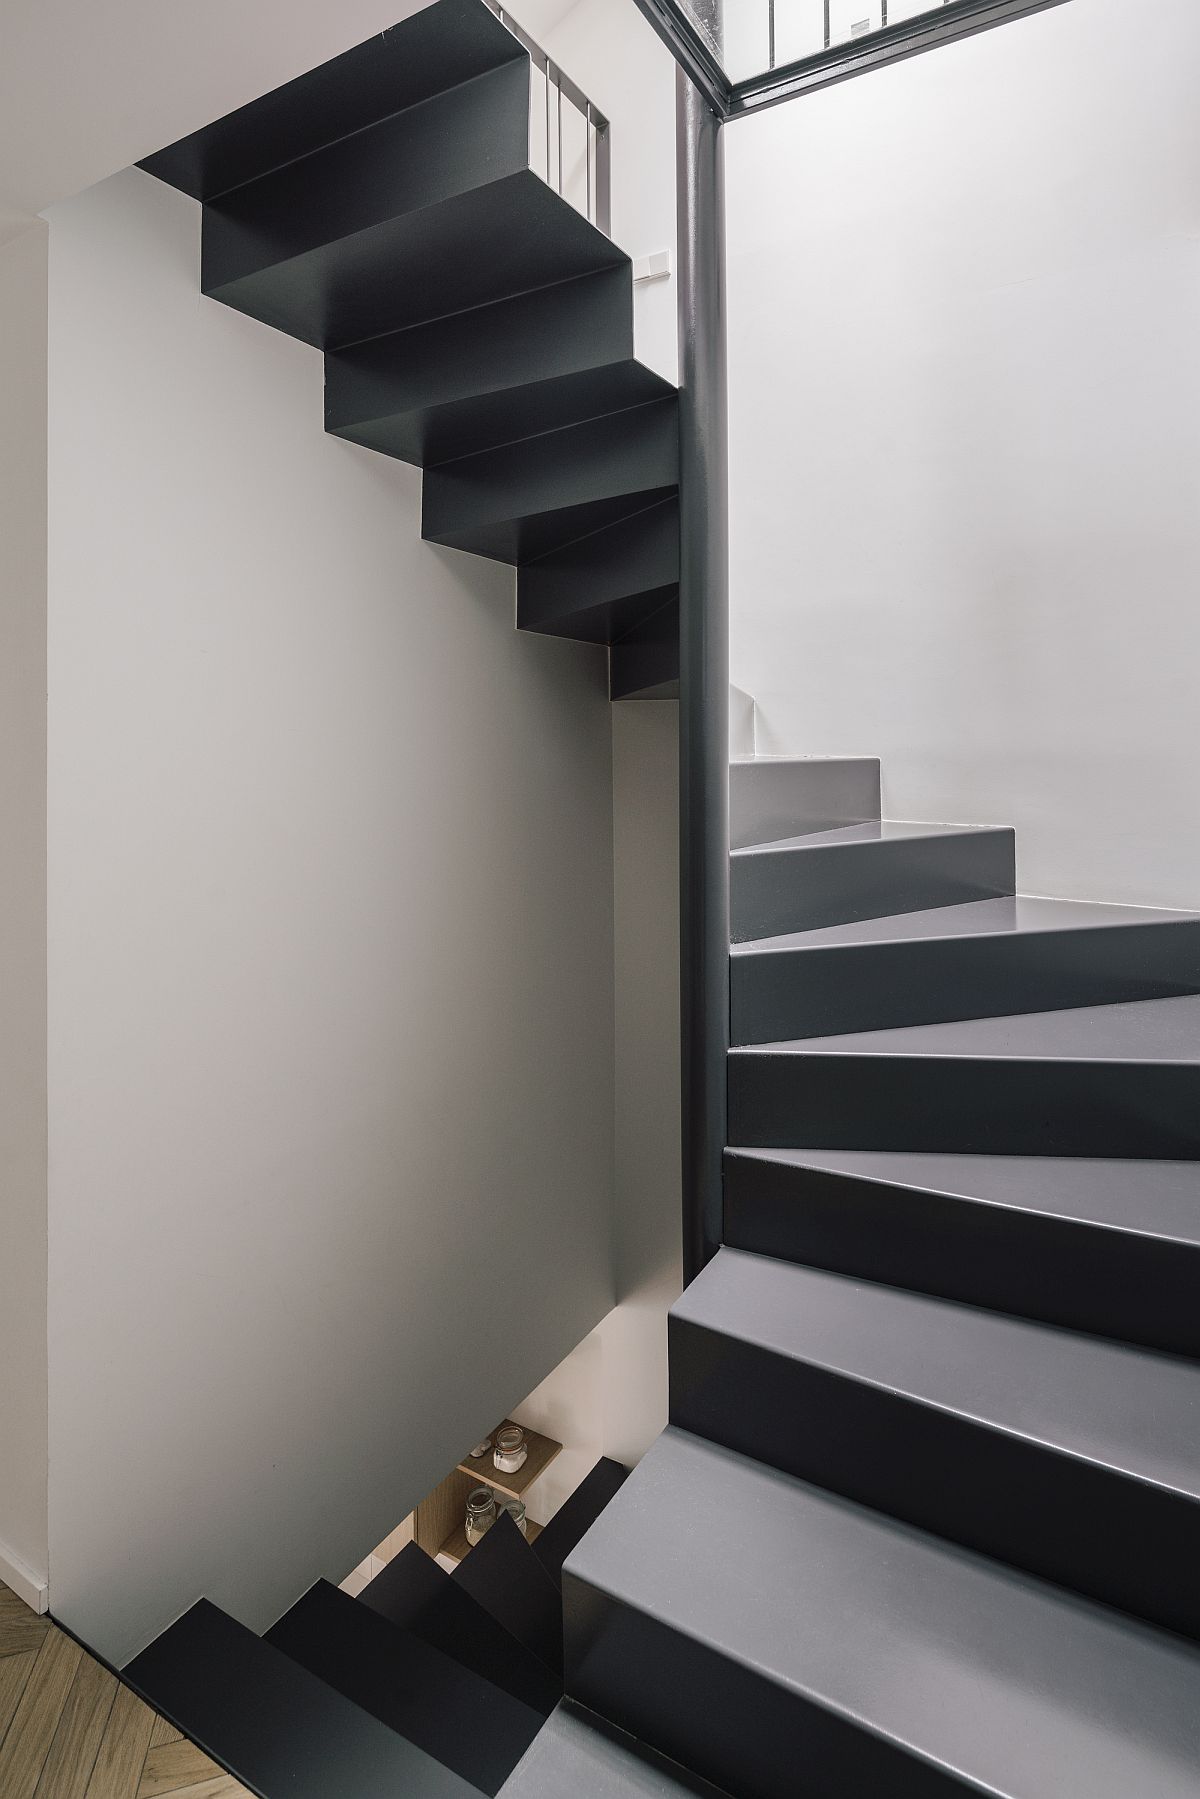 Lovely and space-savvy staircase in gray and white connects the variors levels inside the house